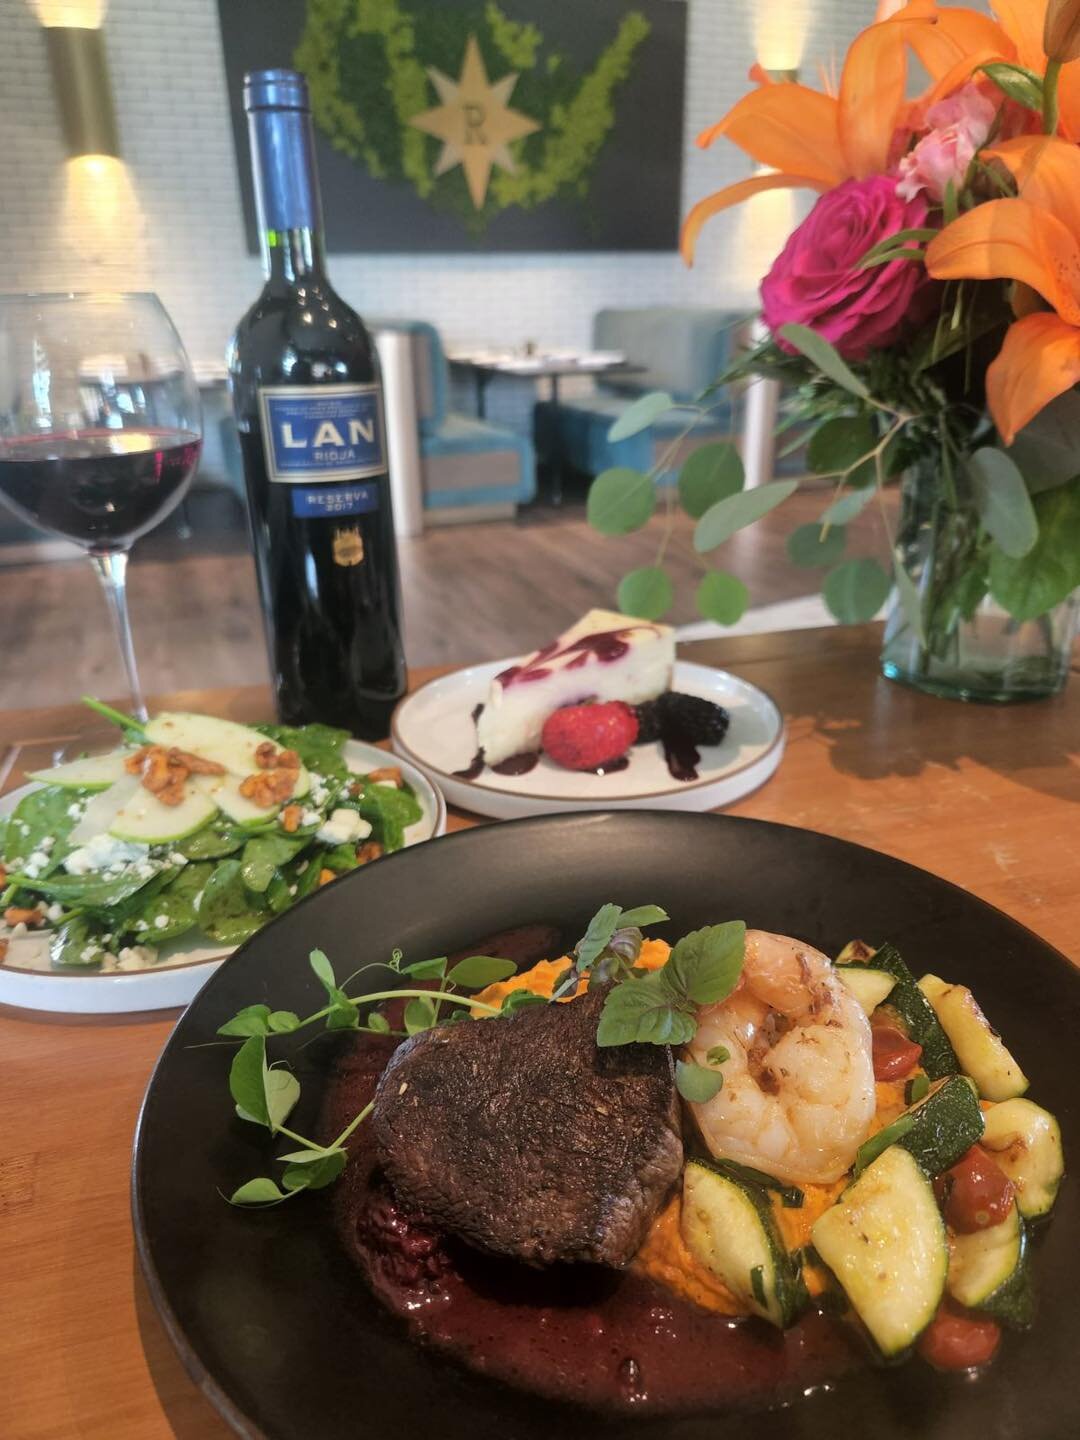 You know the drill!! 😉 Grab your plus one and head in for Dinner for 2!!

👉🏼 Spinach salad with apples, spiced walnuts, and blue cheese

👉🏼 Filet mignon and grilled shrimp with bourbon blackberry sauce, roasted carrot puree, and sauteed zucchini